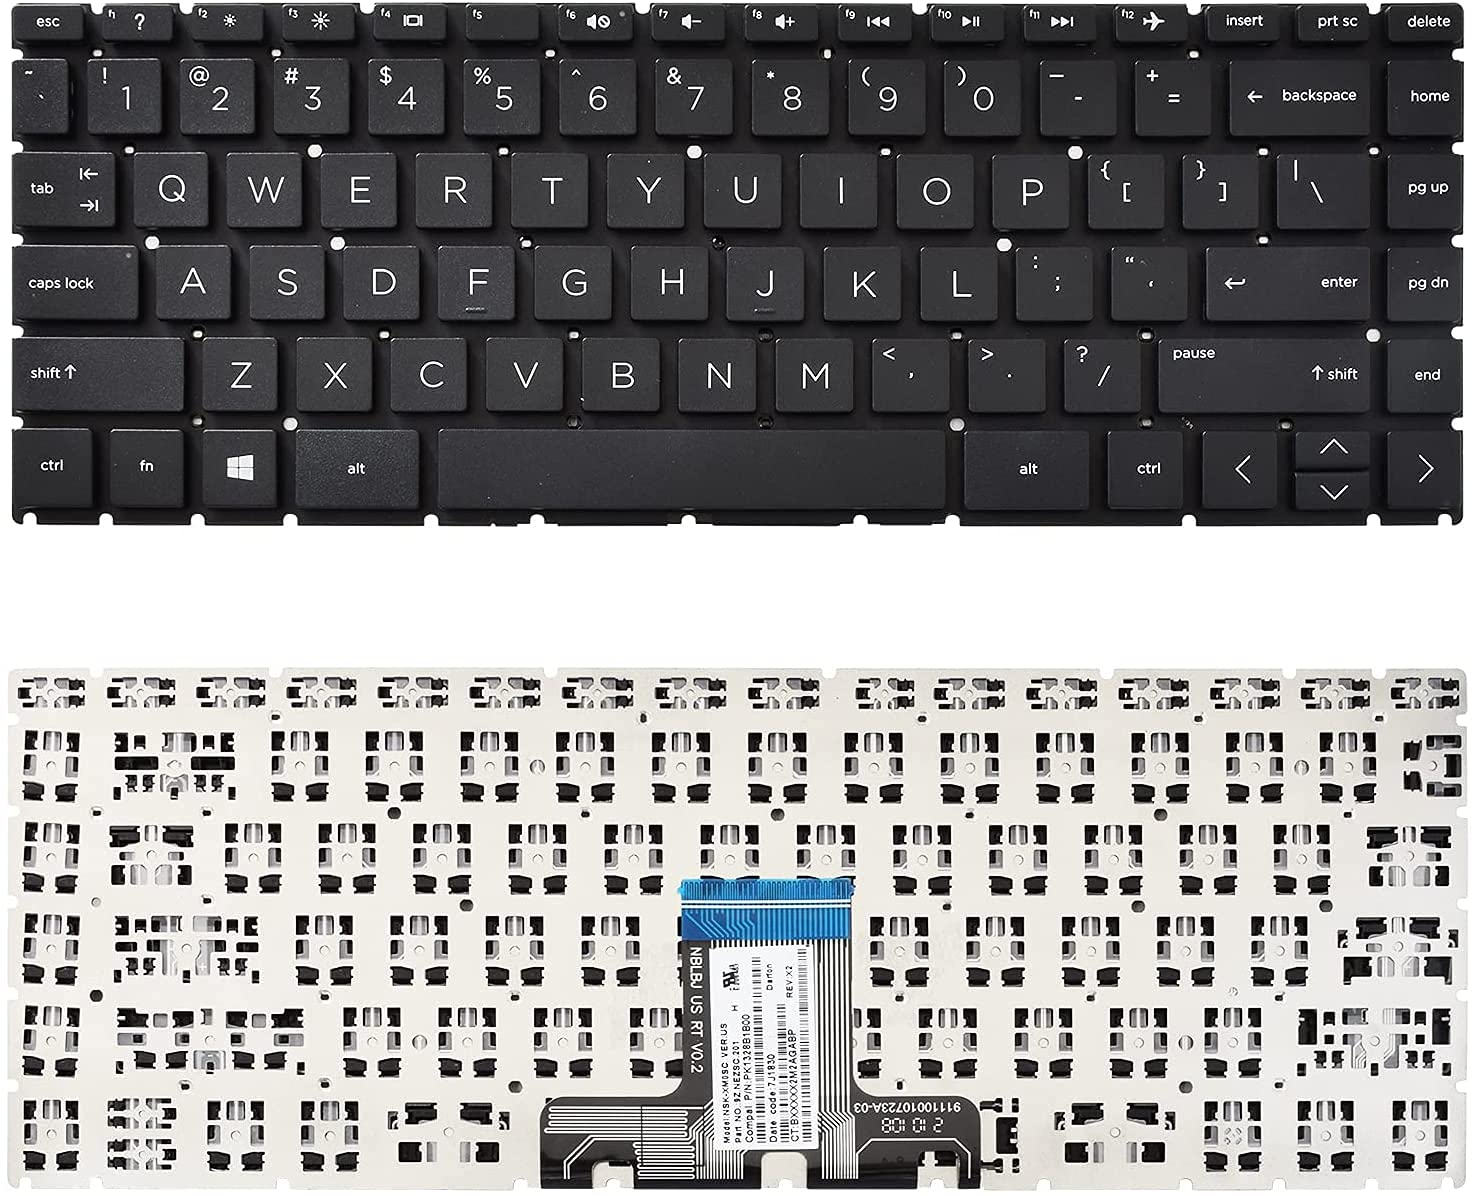 WISTAR Laptop Keyboard Compatible for HP 14-CK 14-CD 14-cm 14-DG 14-DQ 14s-DQ 240 G7 245 G7 246 G7 X360 14-CD 14-DH 14-CE,Black(HP 240 G7)